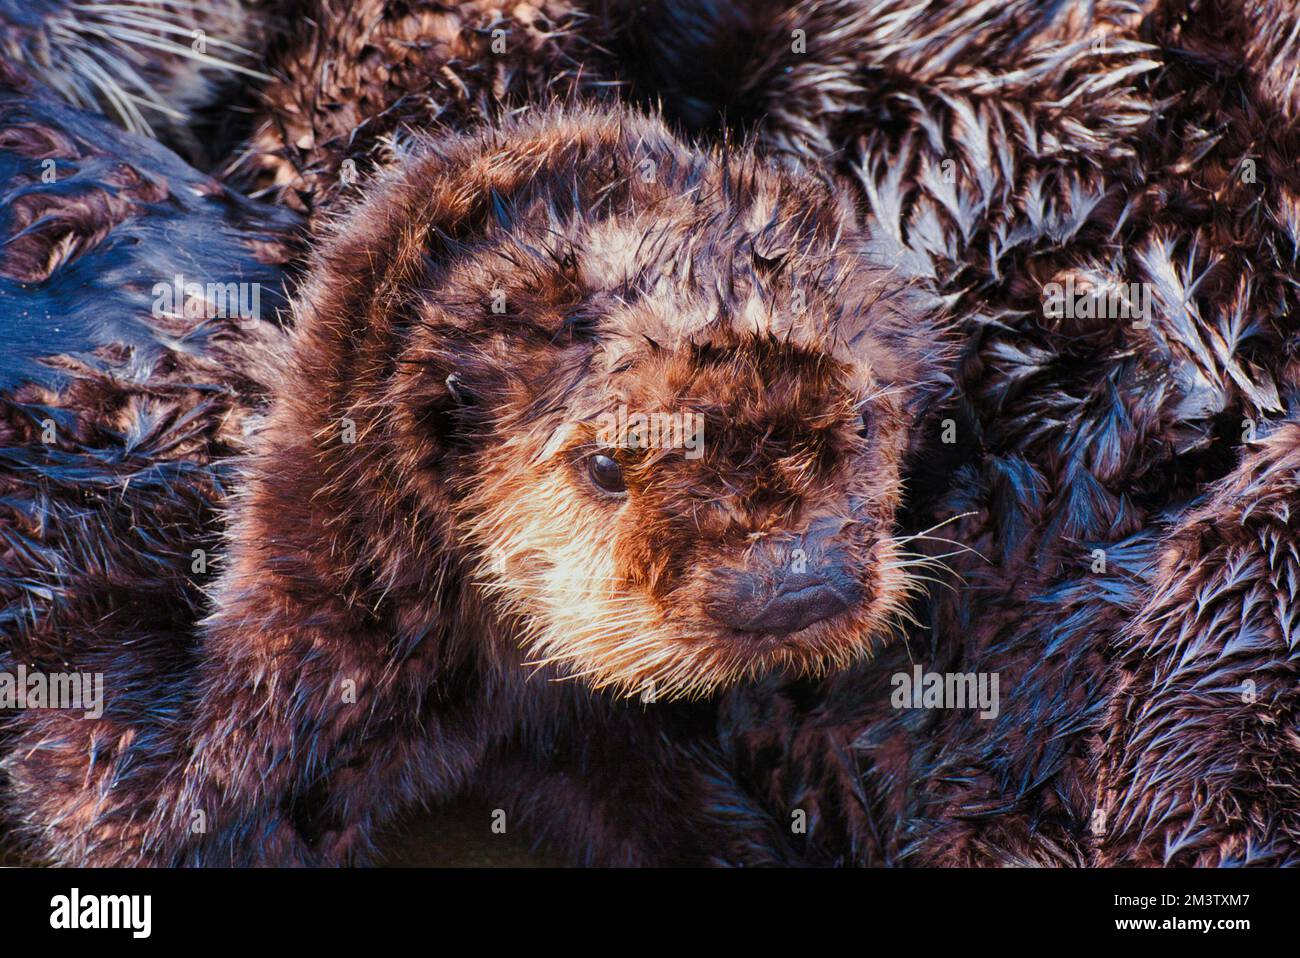 Extreme close-up of a very young sea otter cuddlying with its mother. Stock Photo